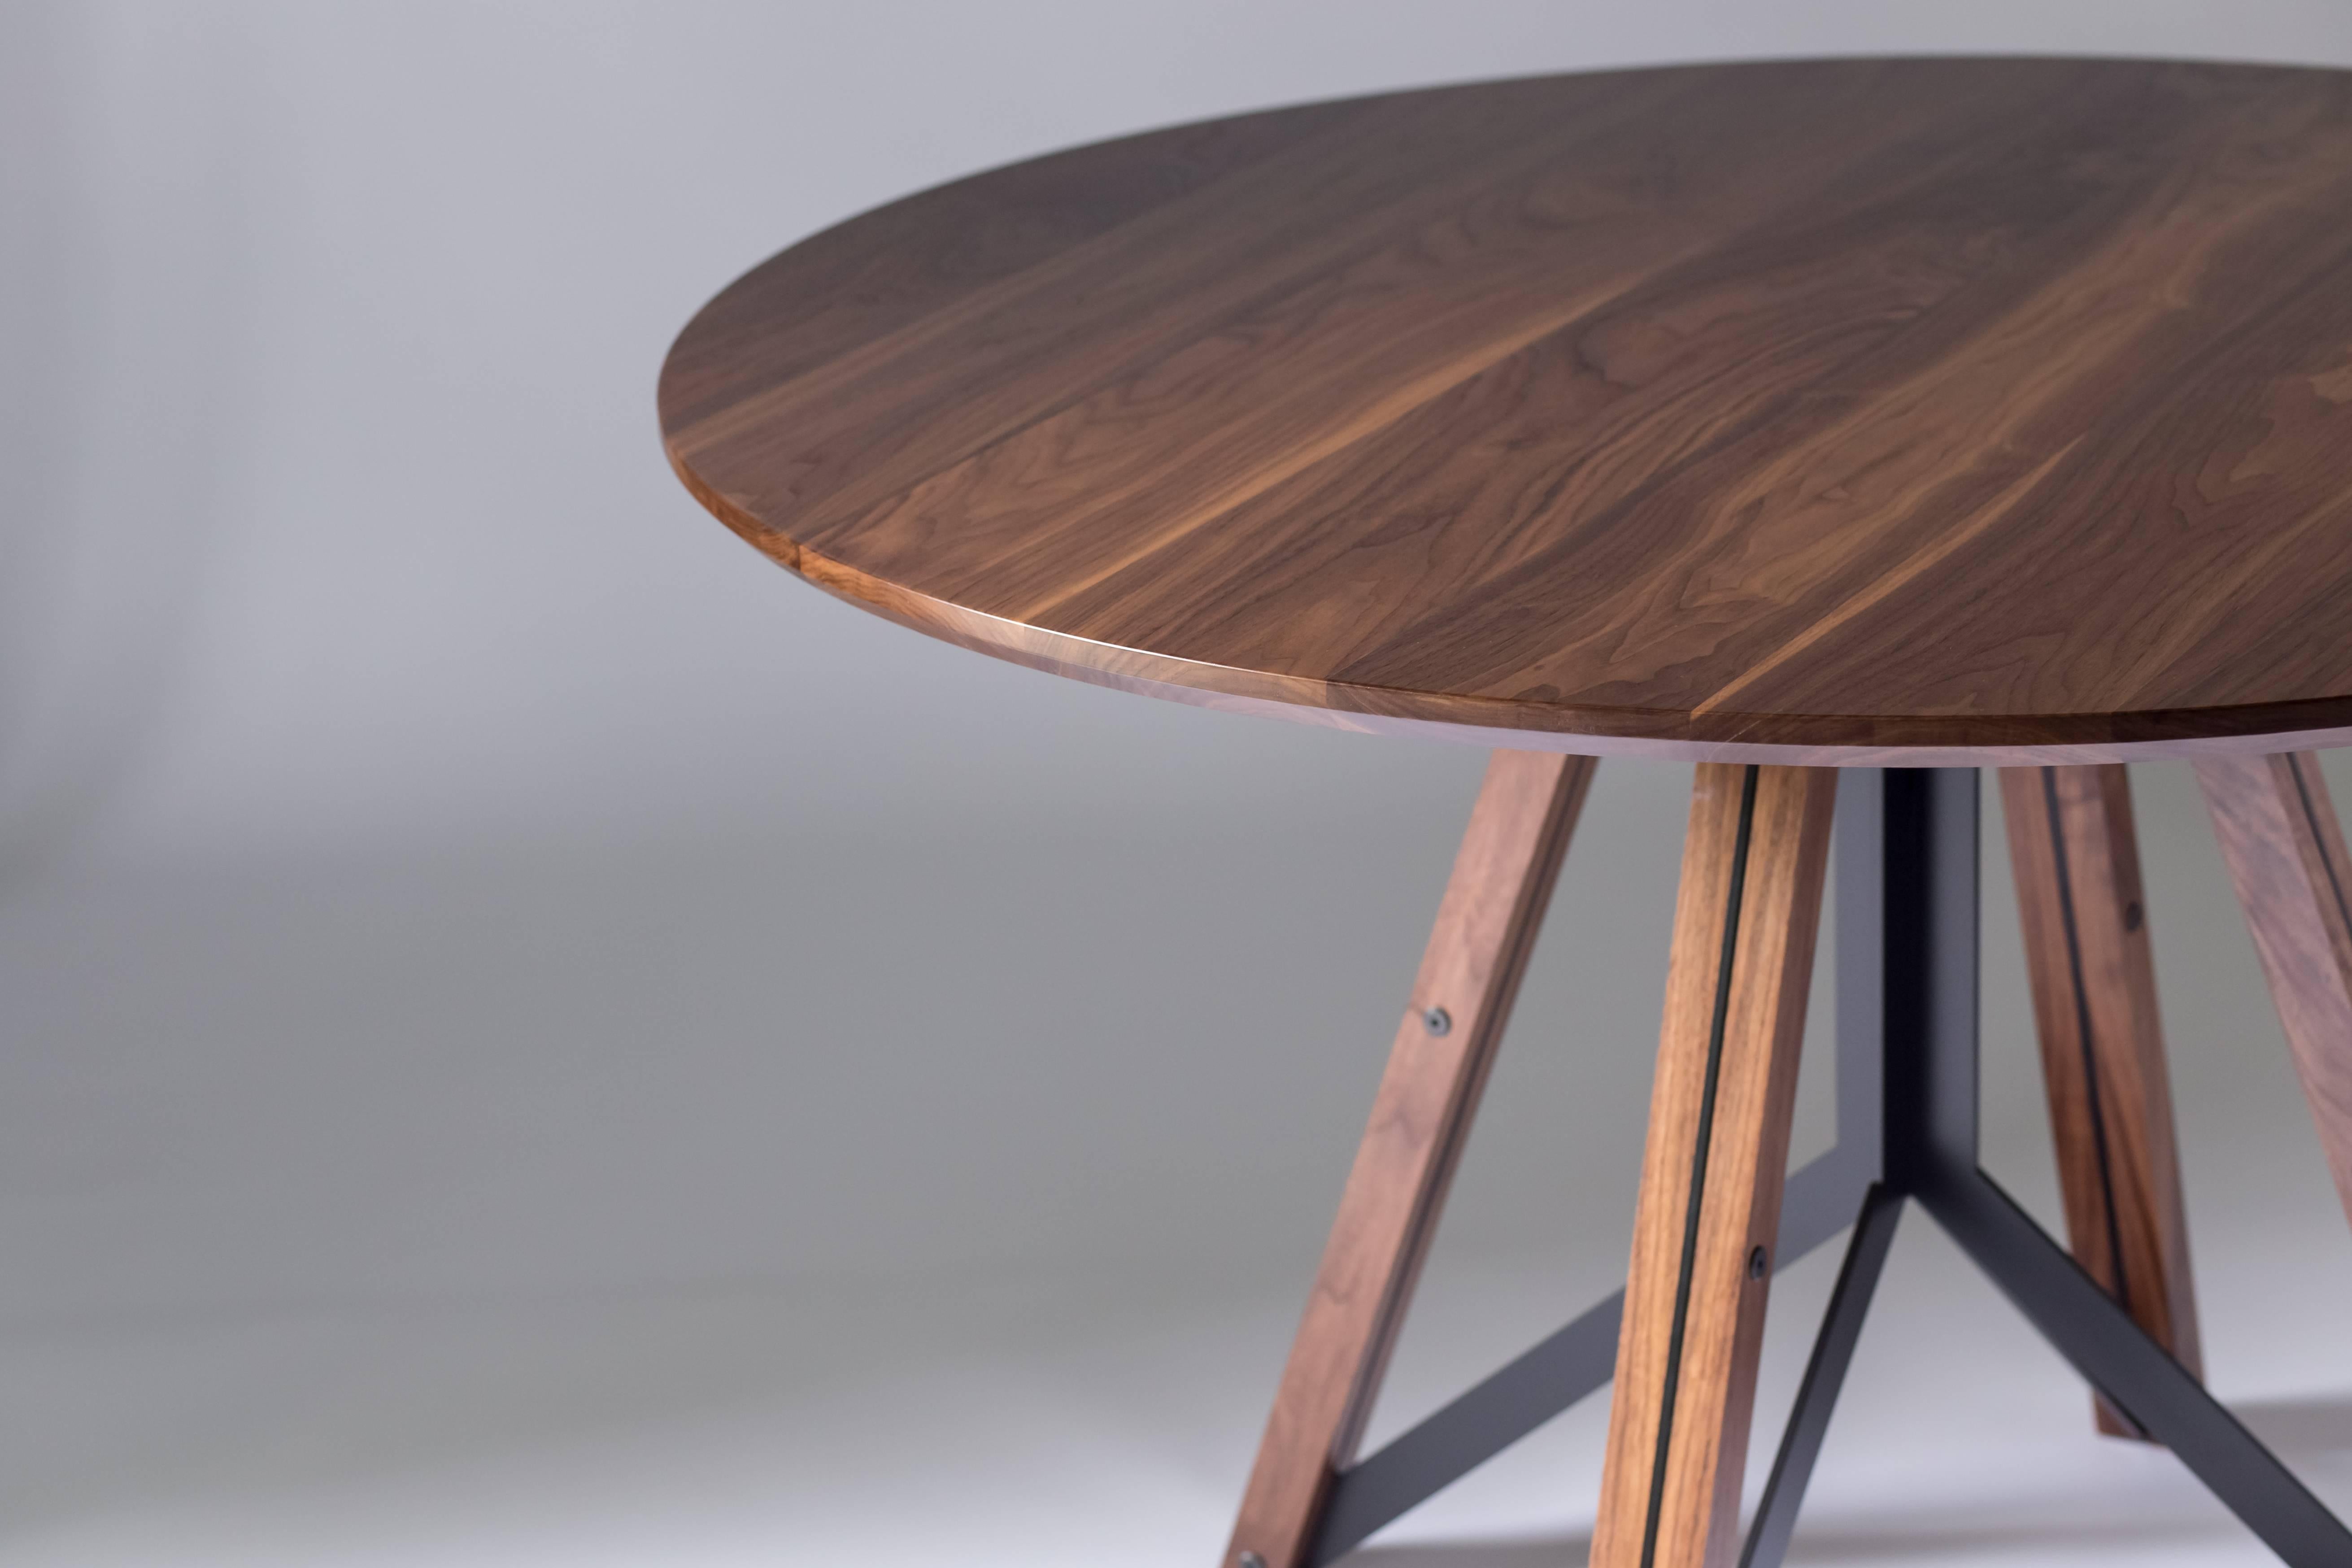 The Trestle - modern walnut, and powder coated steel round dining table

Made from solid walnut and welded steel, the Trestle takes inspiration from classic bridge construction and the Iconic works of Gustave Eiffel. The steel base structure is